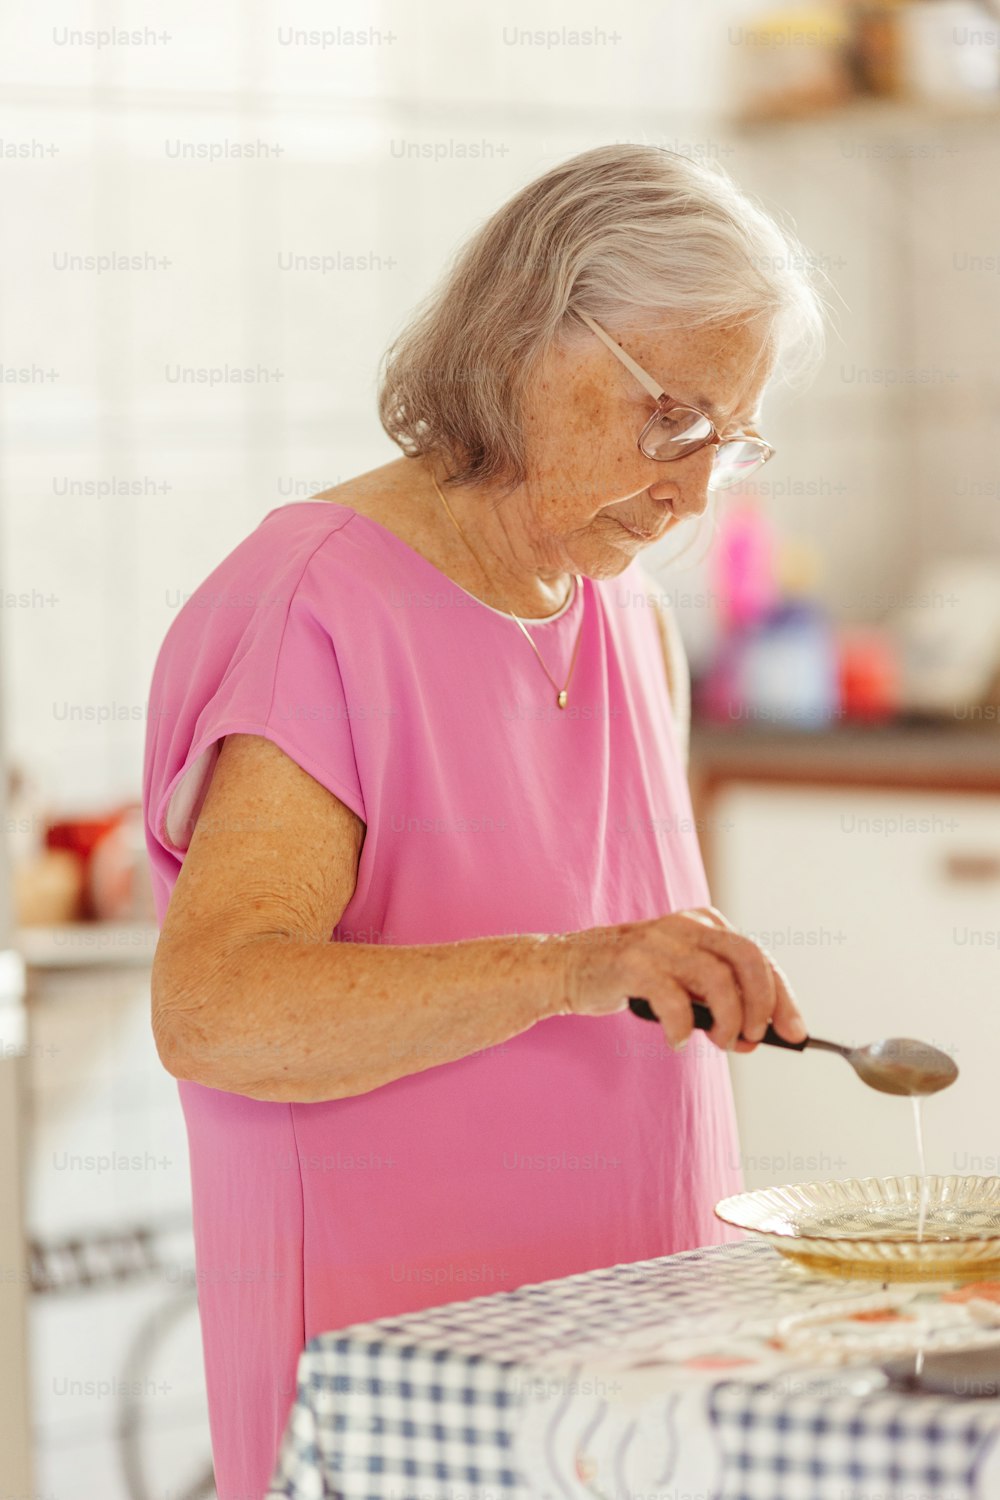 a woman in a pink shirt is preparing food